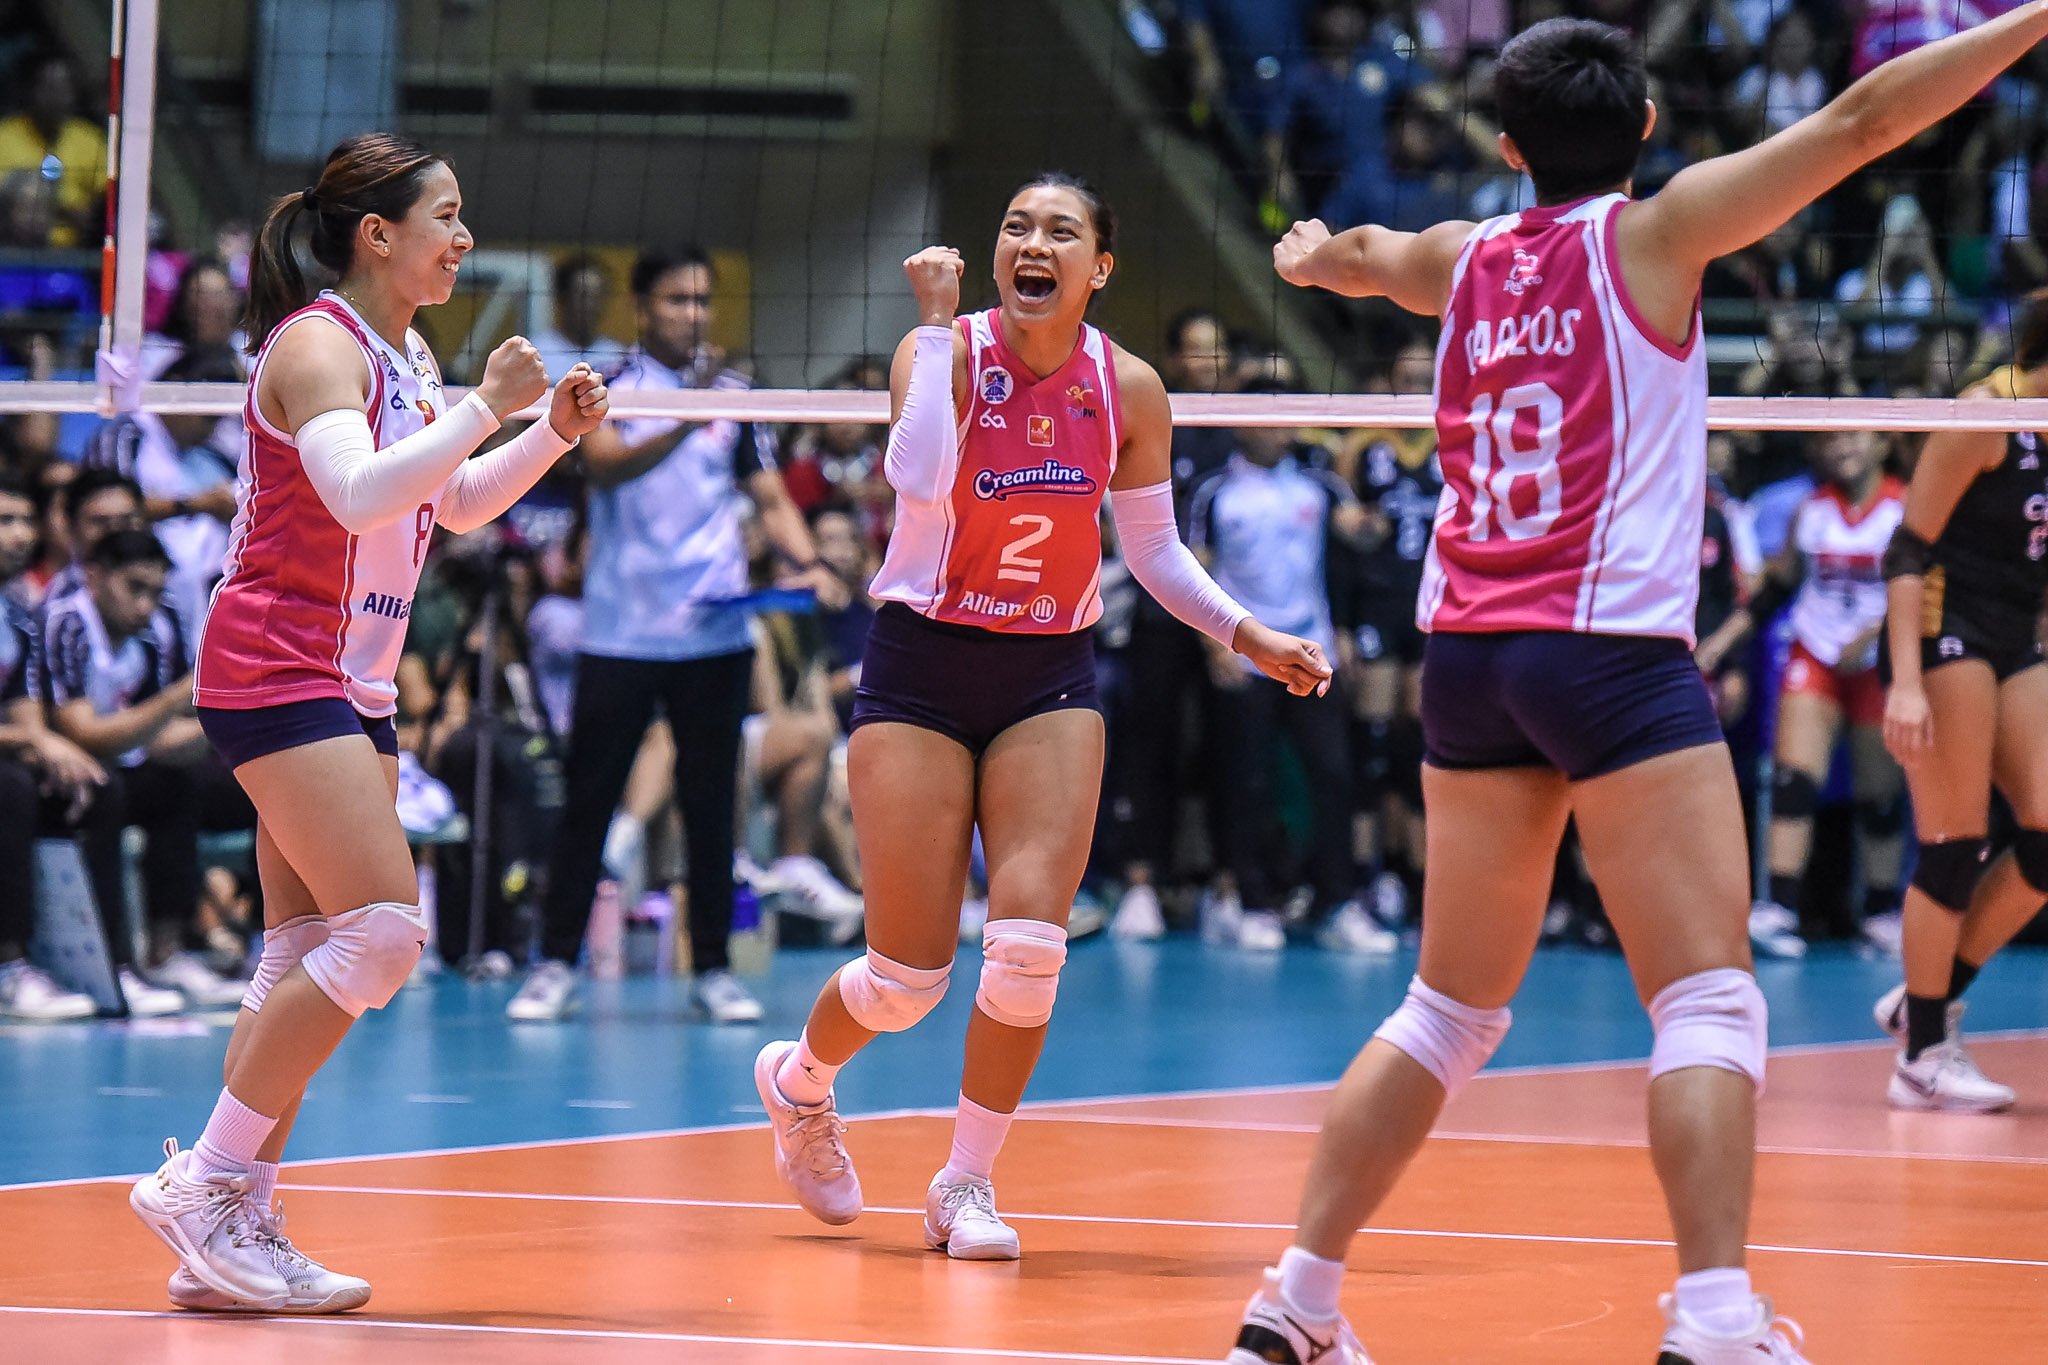 Creamline in the Premier Volleyball League in the Philippines